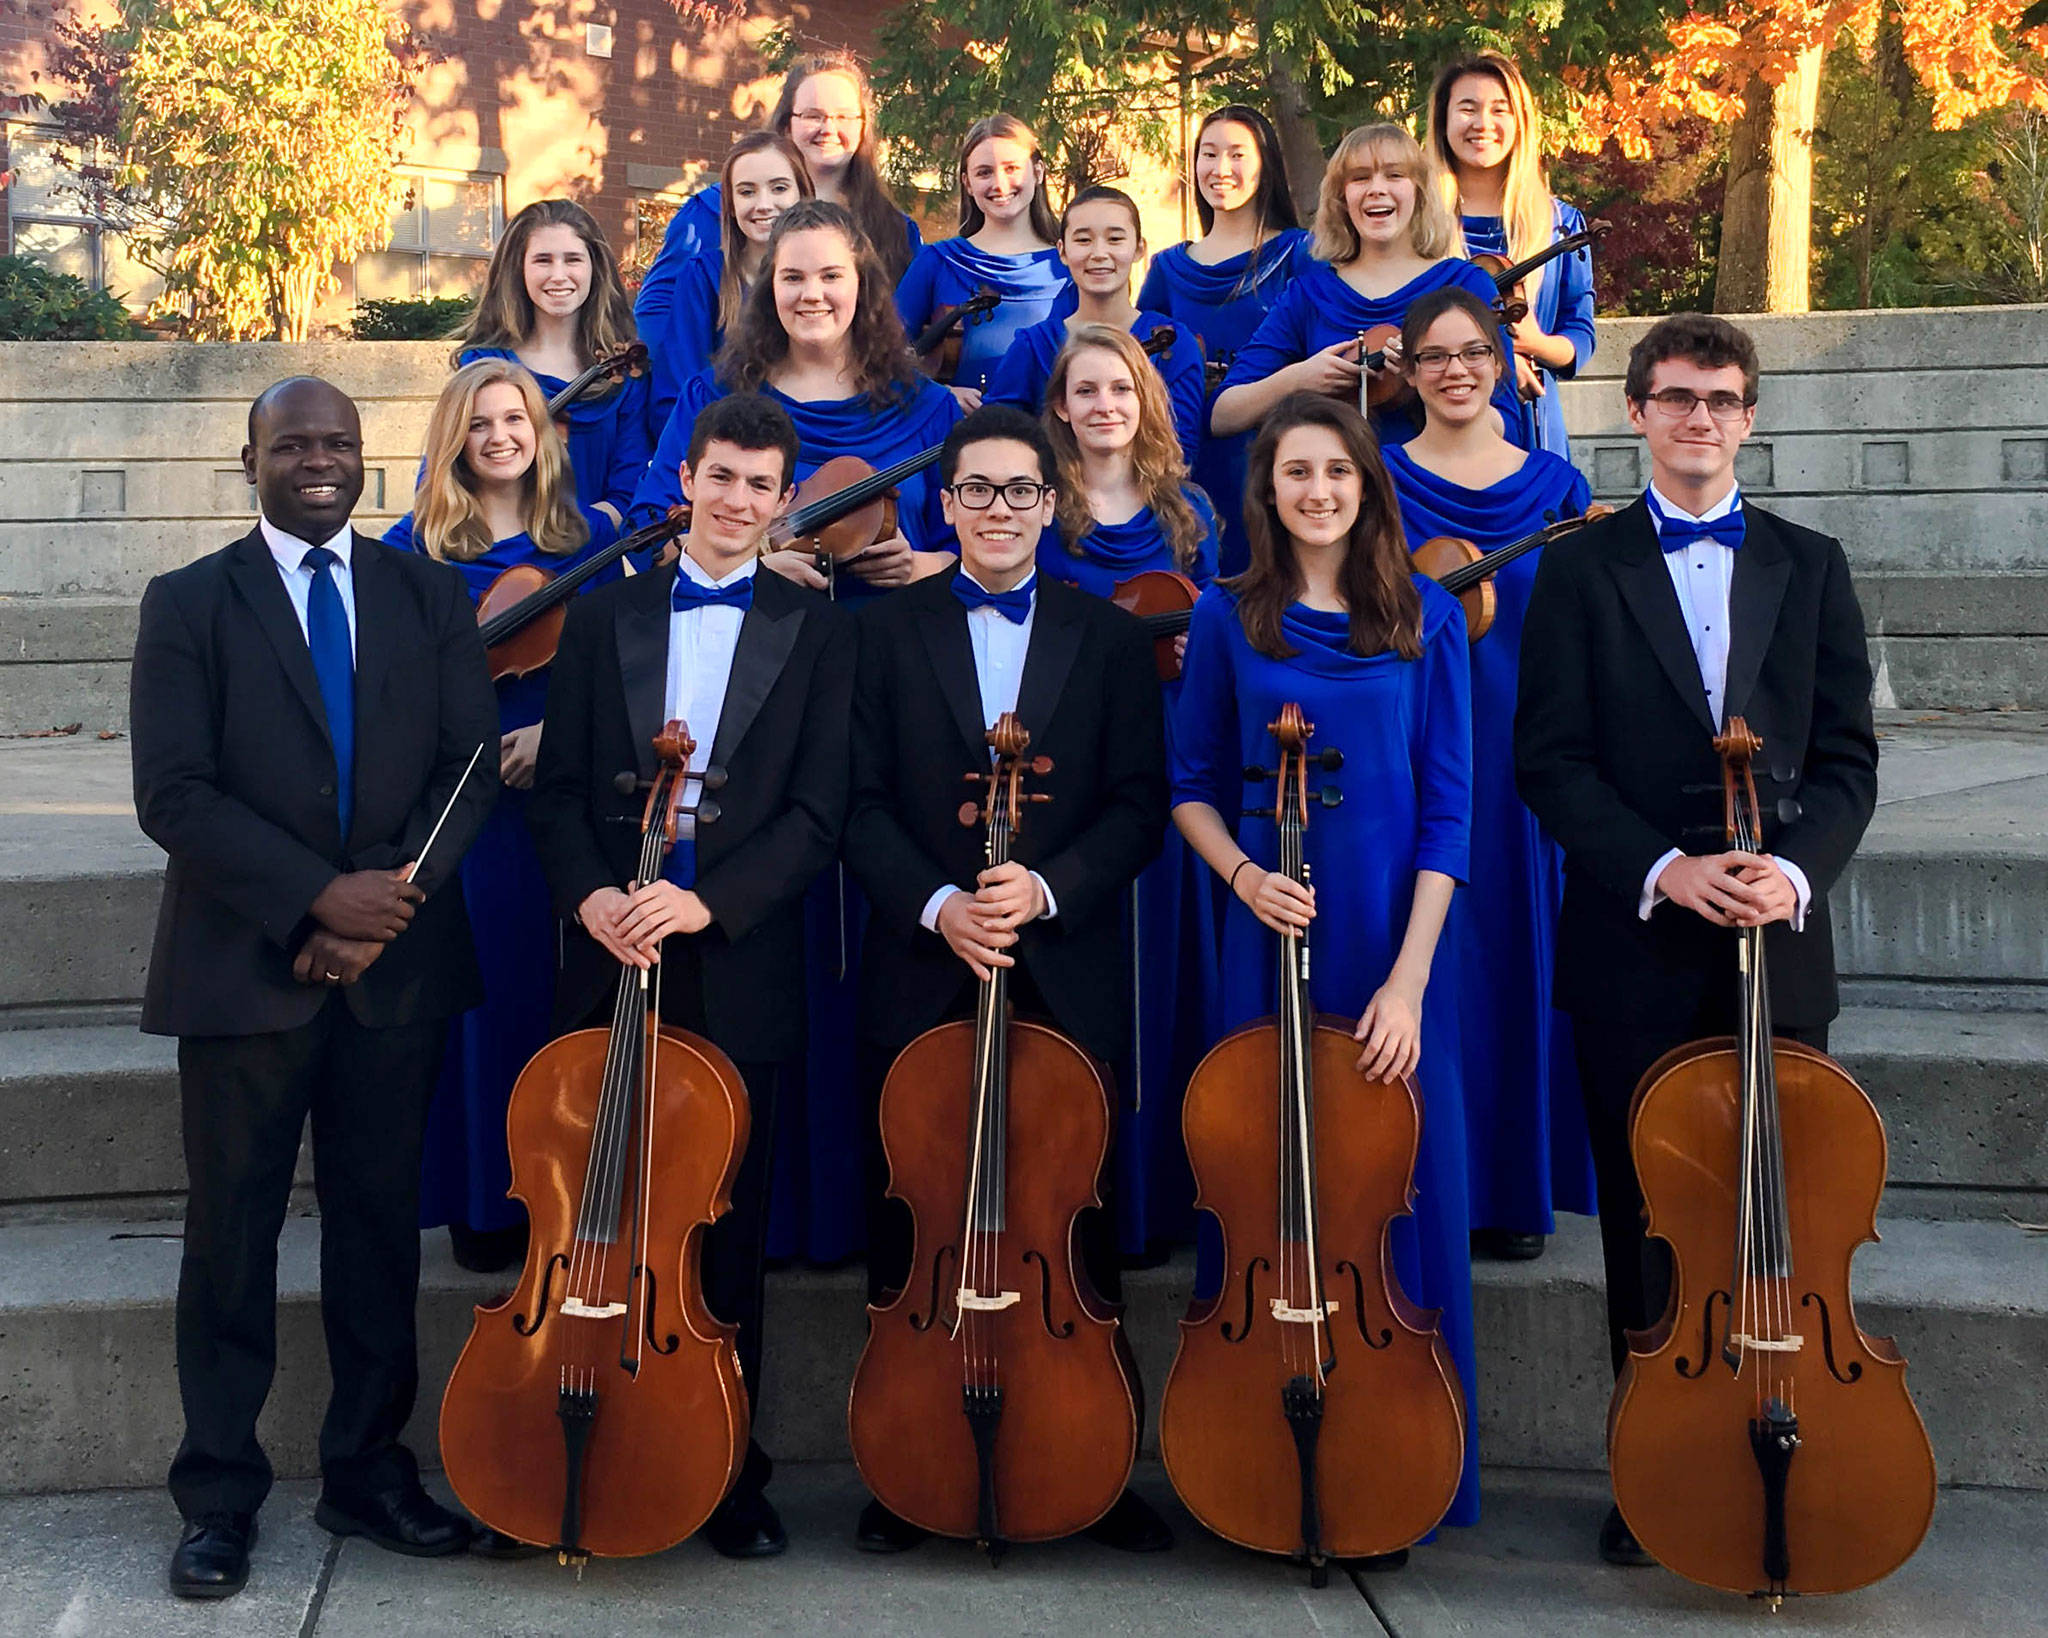 The Port Angeles High School Chamber Orchestra plays at 3:30 p.m. Tuesday, Dec. 5, at St. Luke’s Episcopal Church, 525 N. Fifth Ave., for the church’s Music Live with Lunch series. They’ll play for 45 minutes with cookies and tea available before the show. Submitted photo